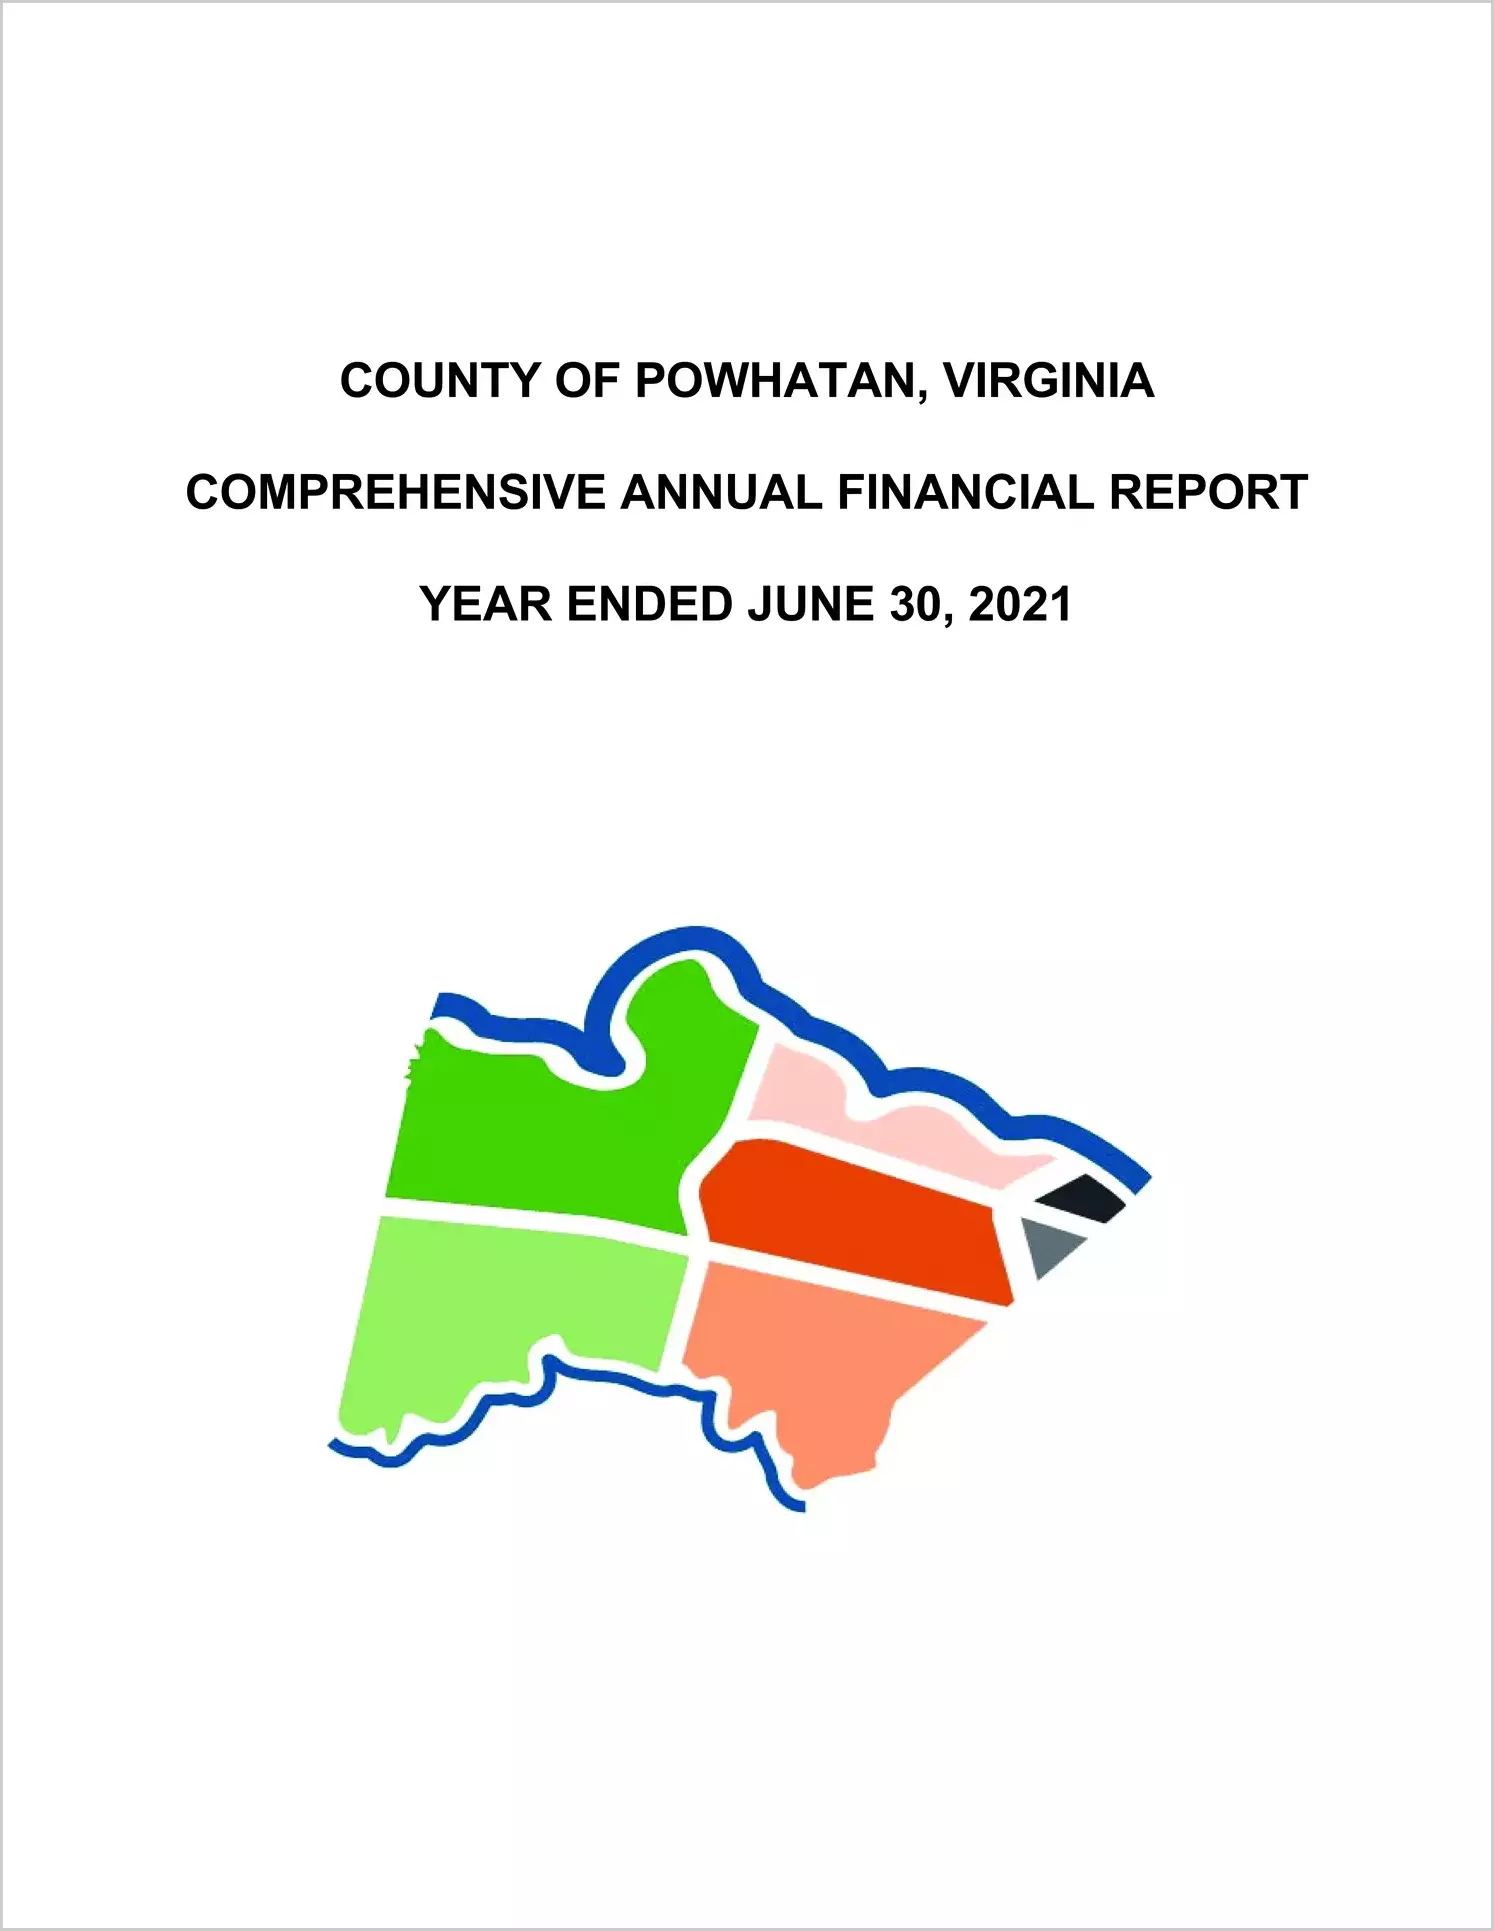 2021 Annual Financial Report for County of Powhatan